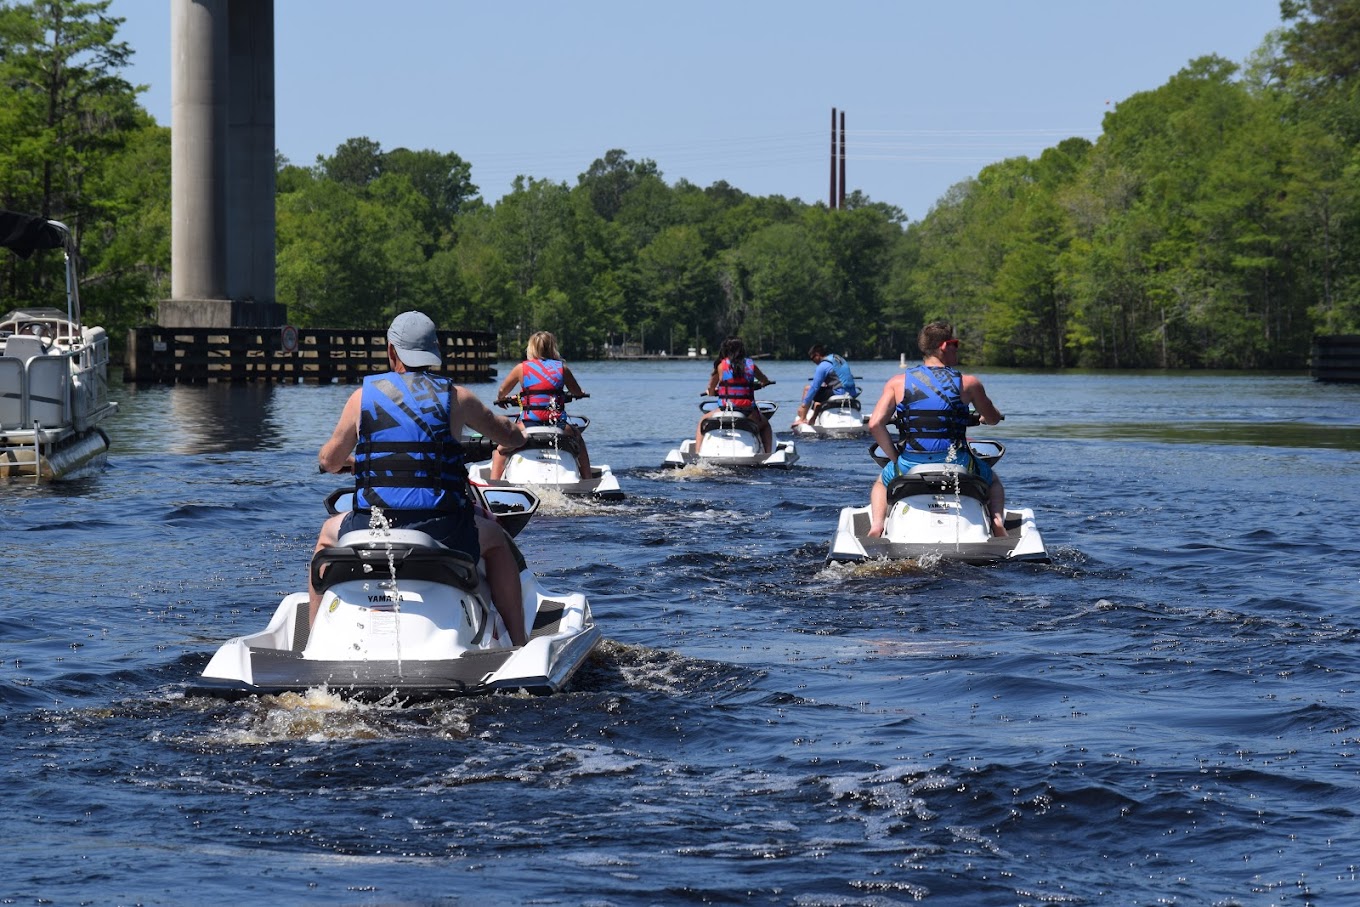 Jet Ski Rentals in Myrtle Beach: Where to Go image thumbnail